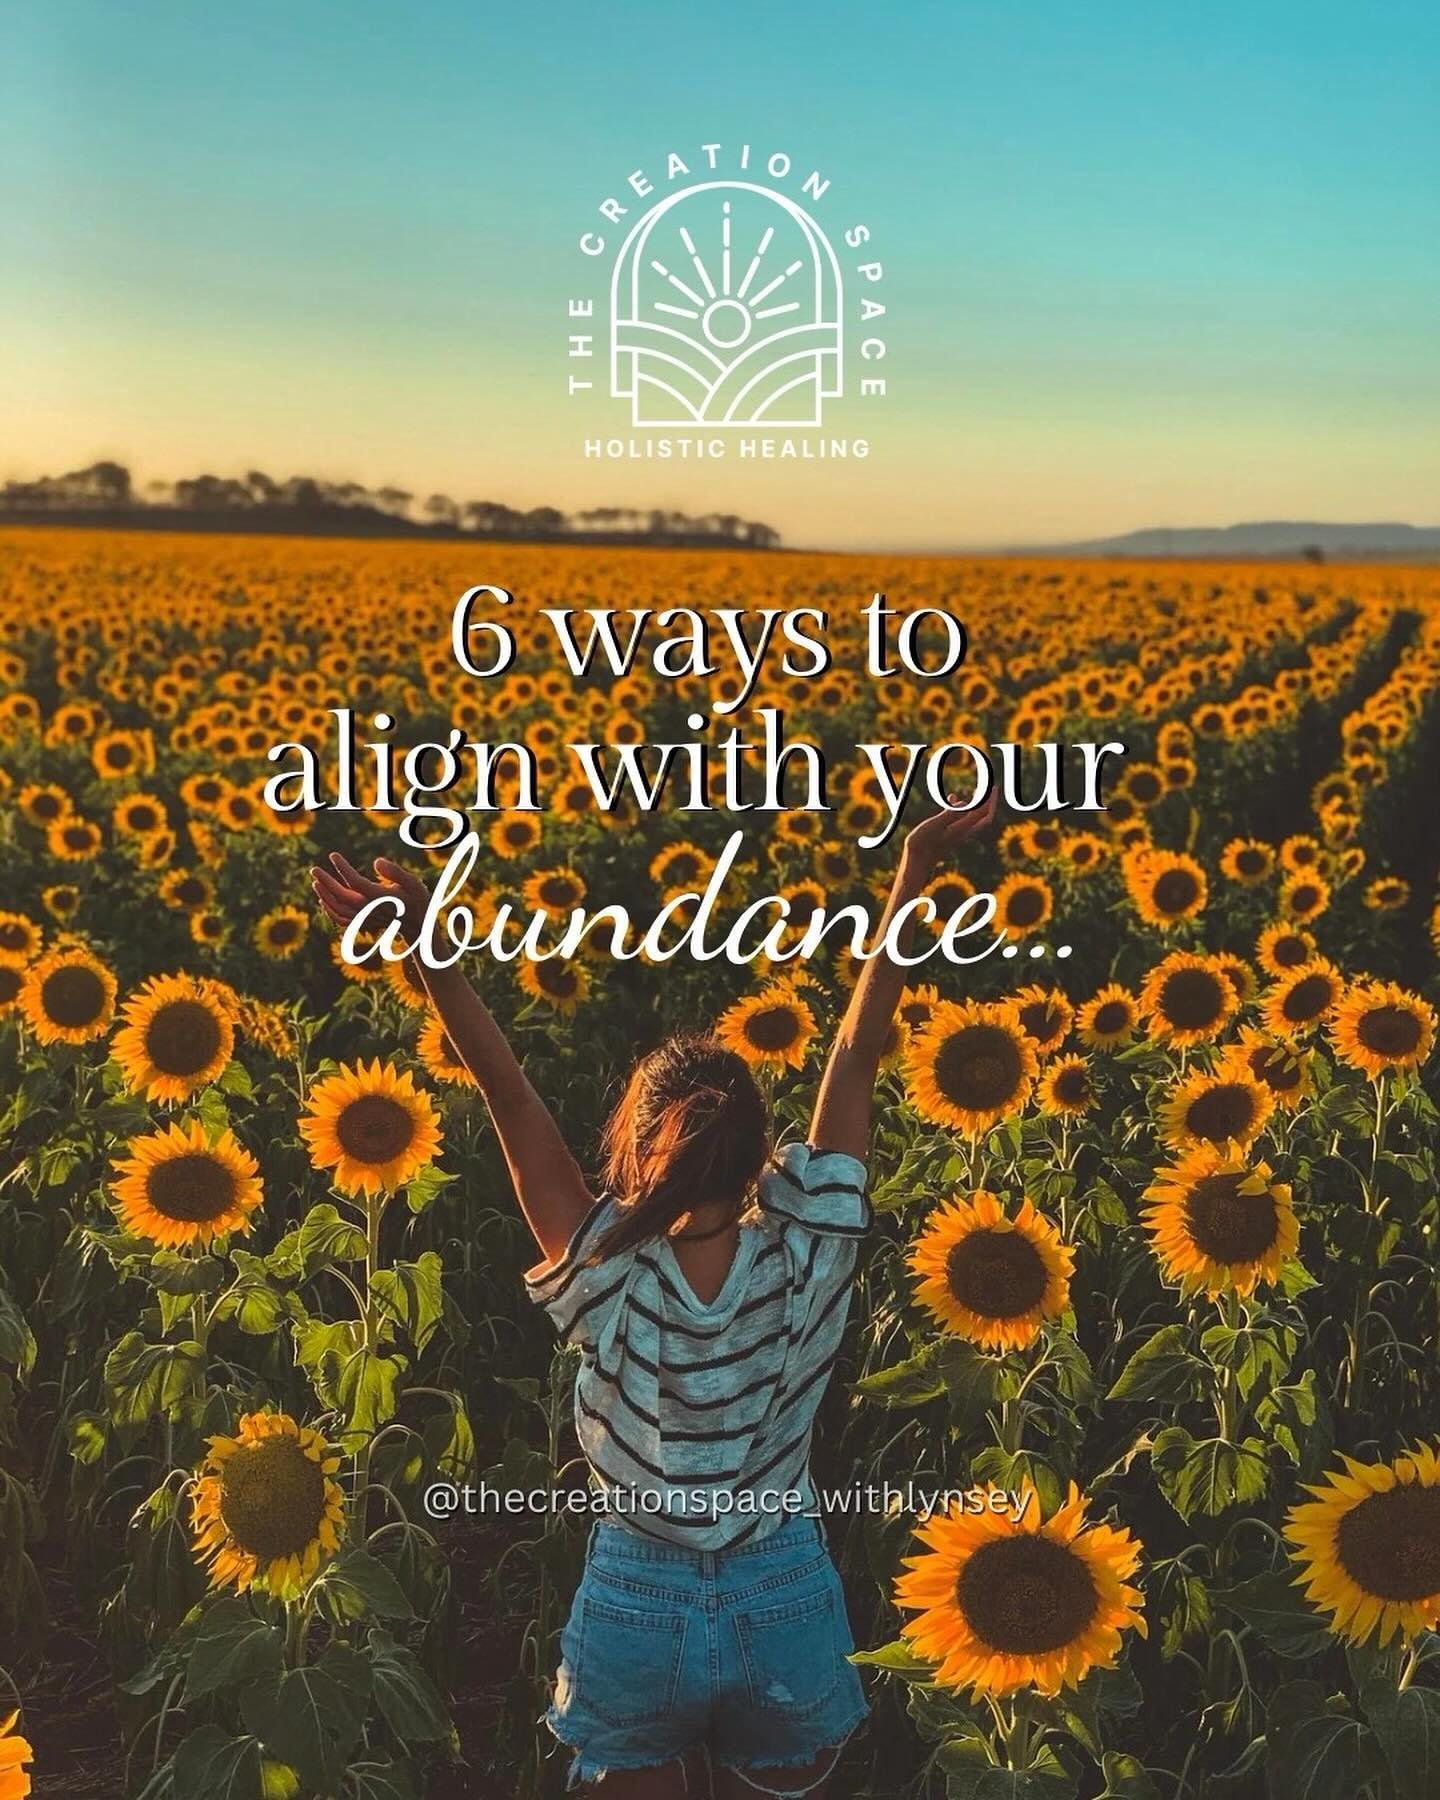 Everything we are taught about abundance in society is upside down and back to front.  We are taught to chase the flashy cars, the nice house and the successful career.  But what if abundance actually looked like having time to do the things you love